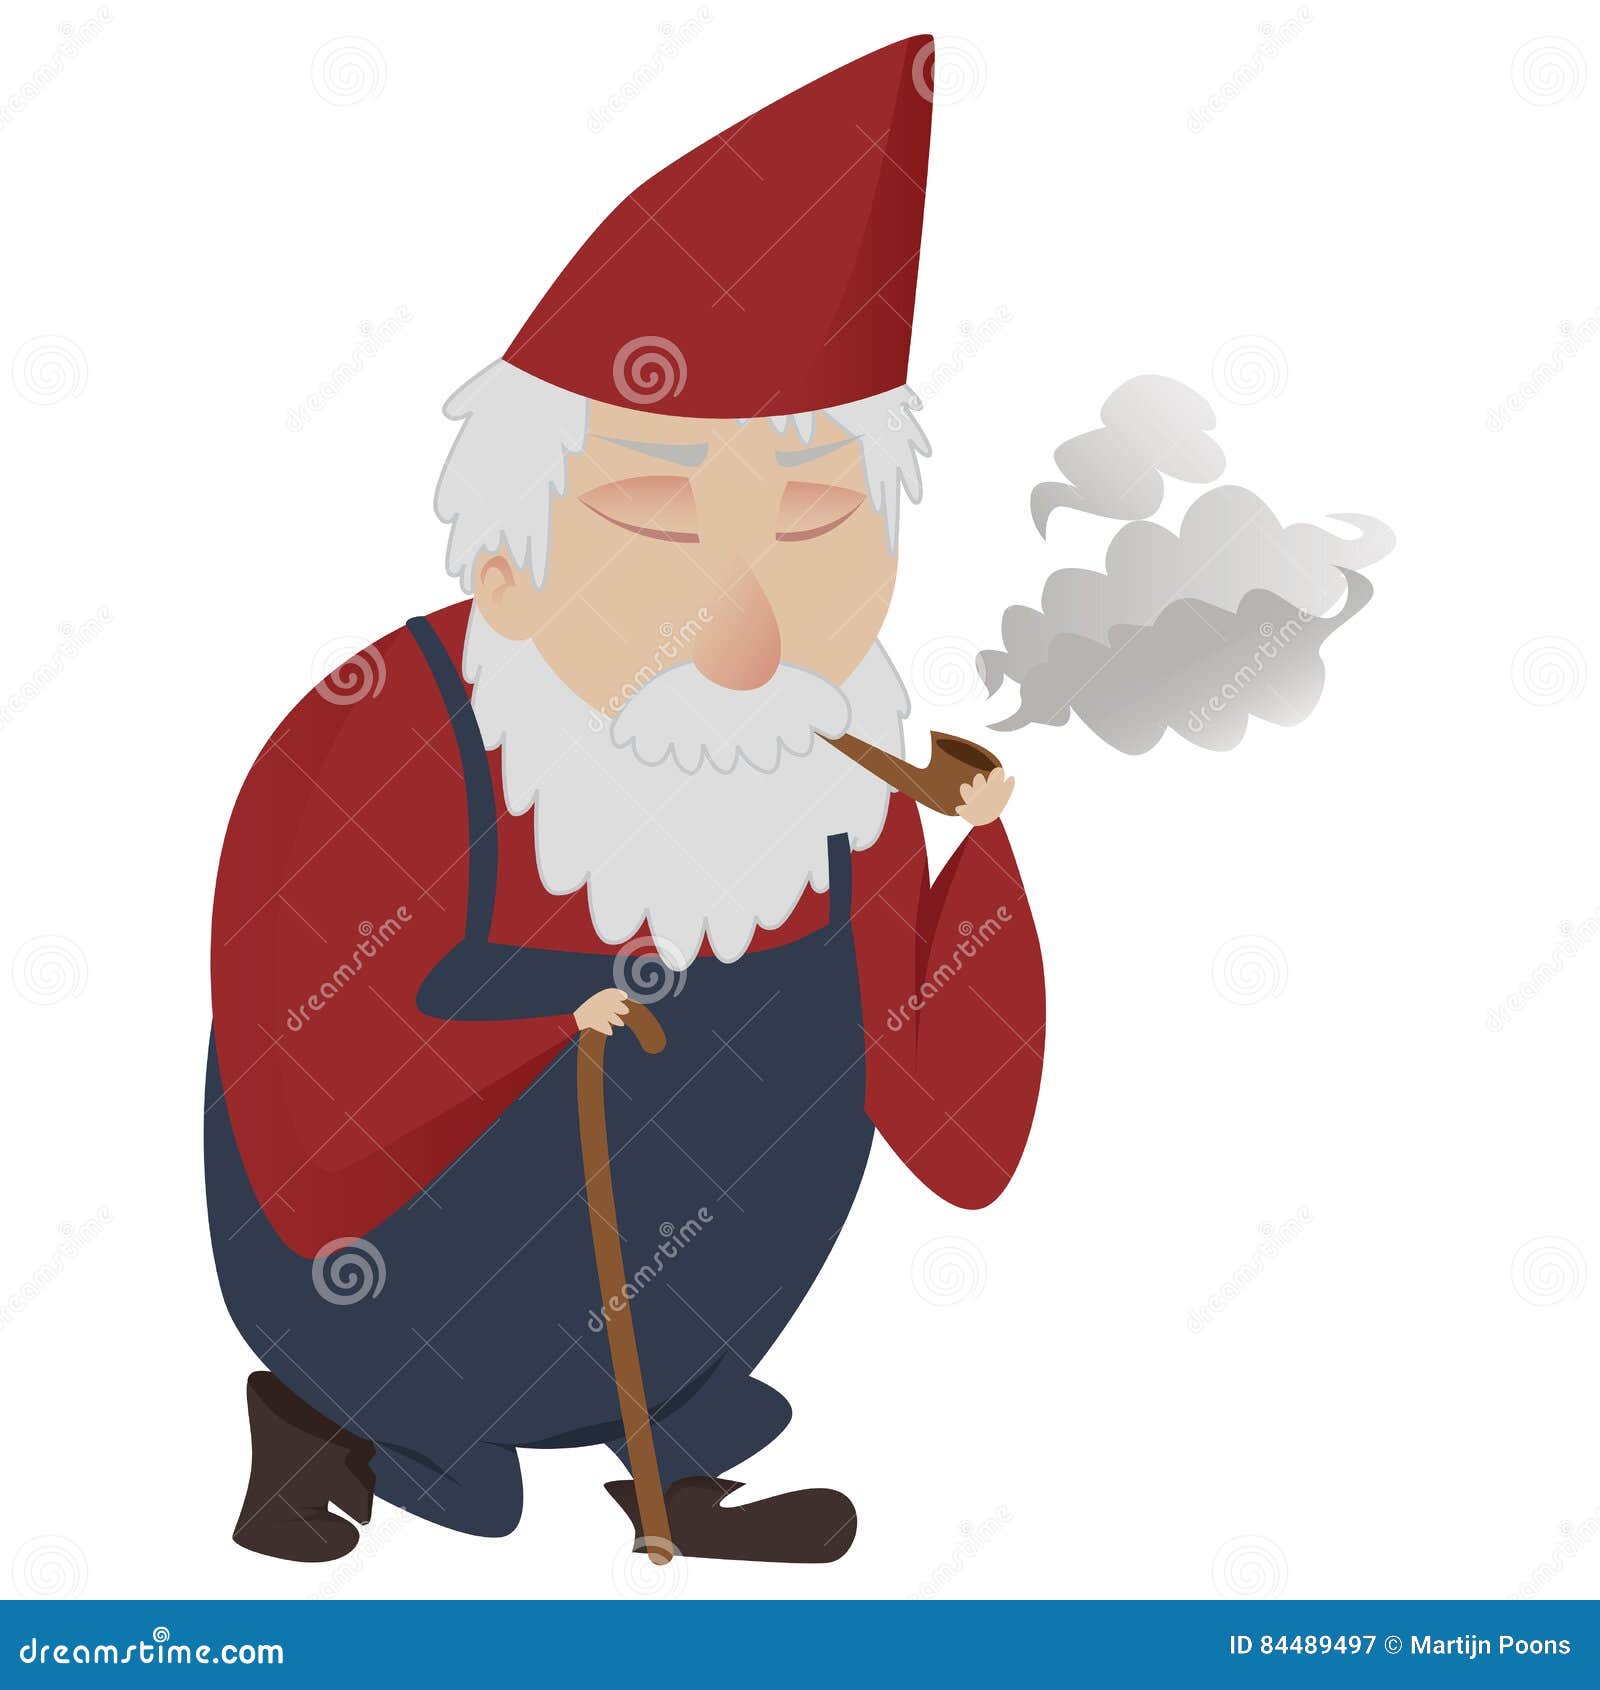 Classic garden gnome stock vector. Illustration of giving - 84489497